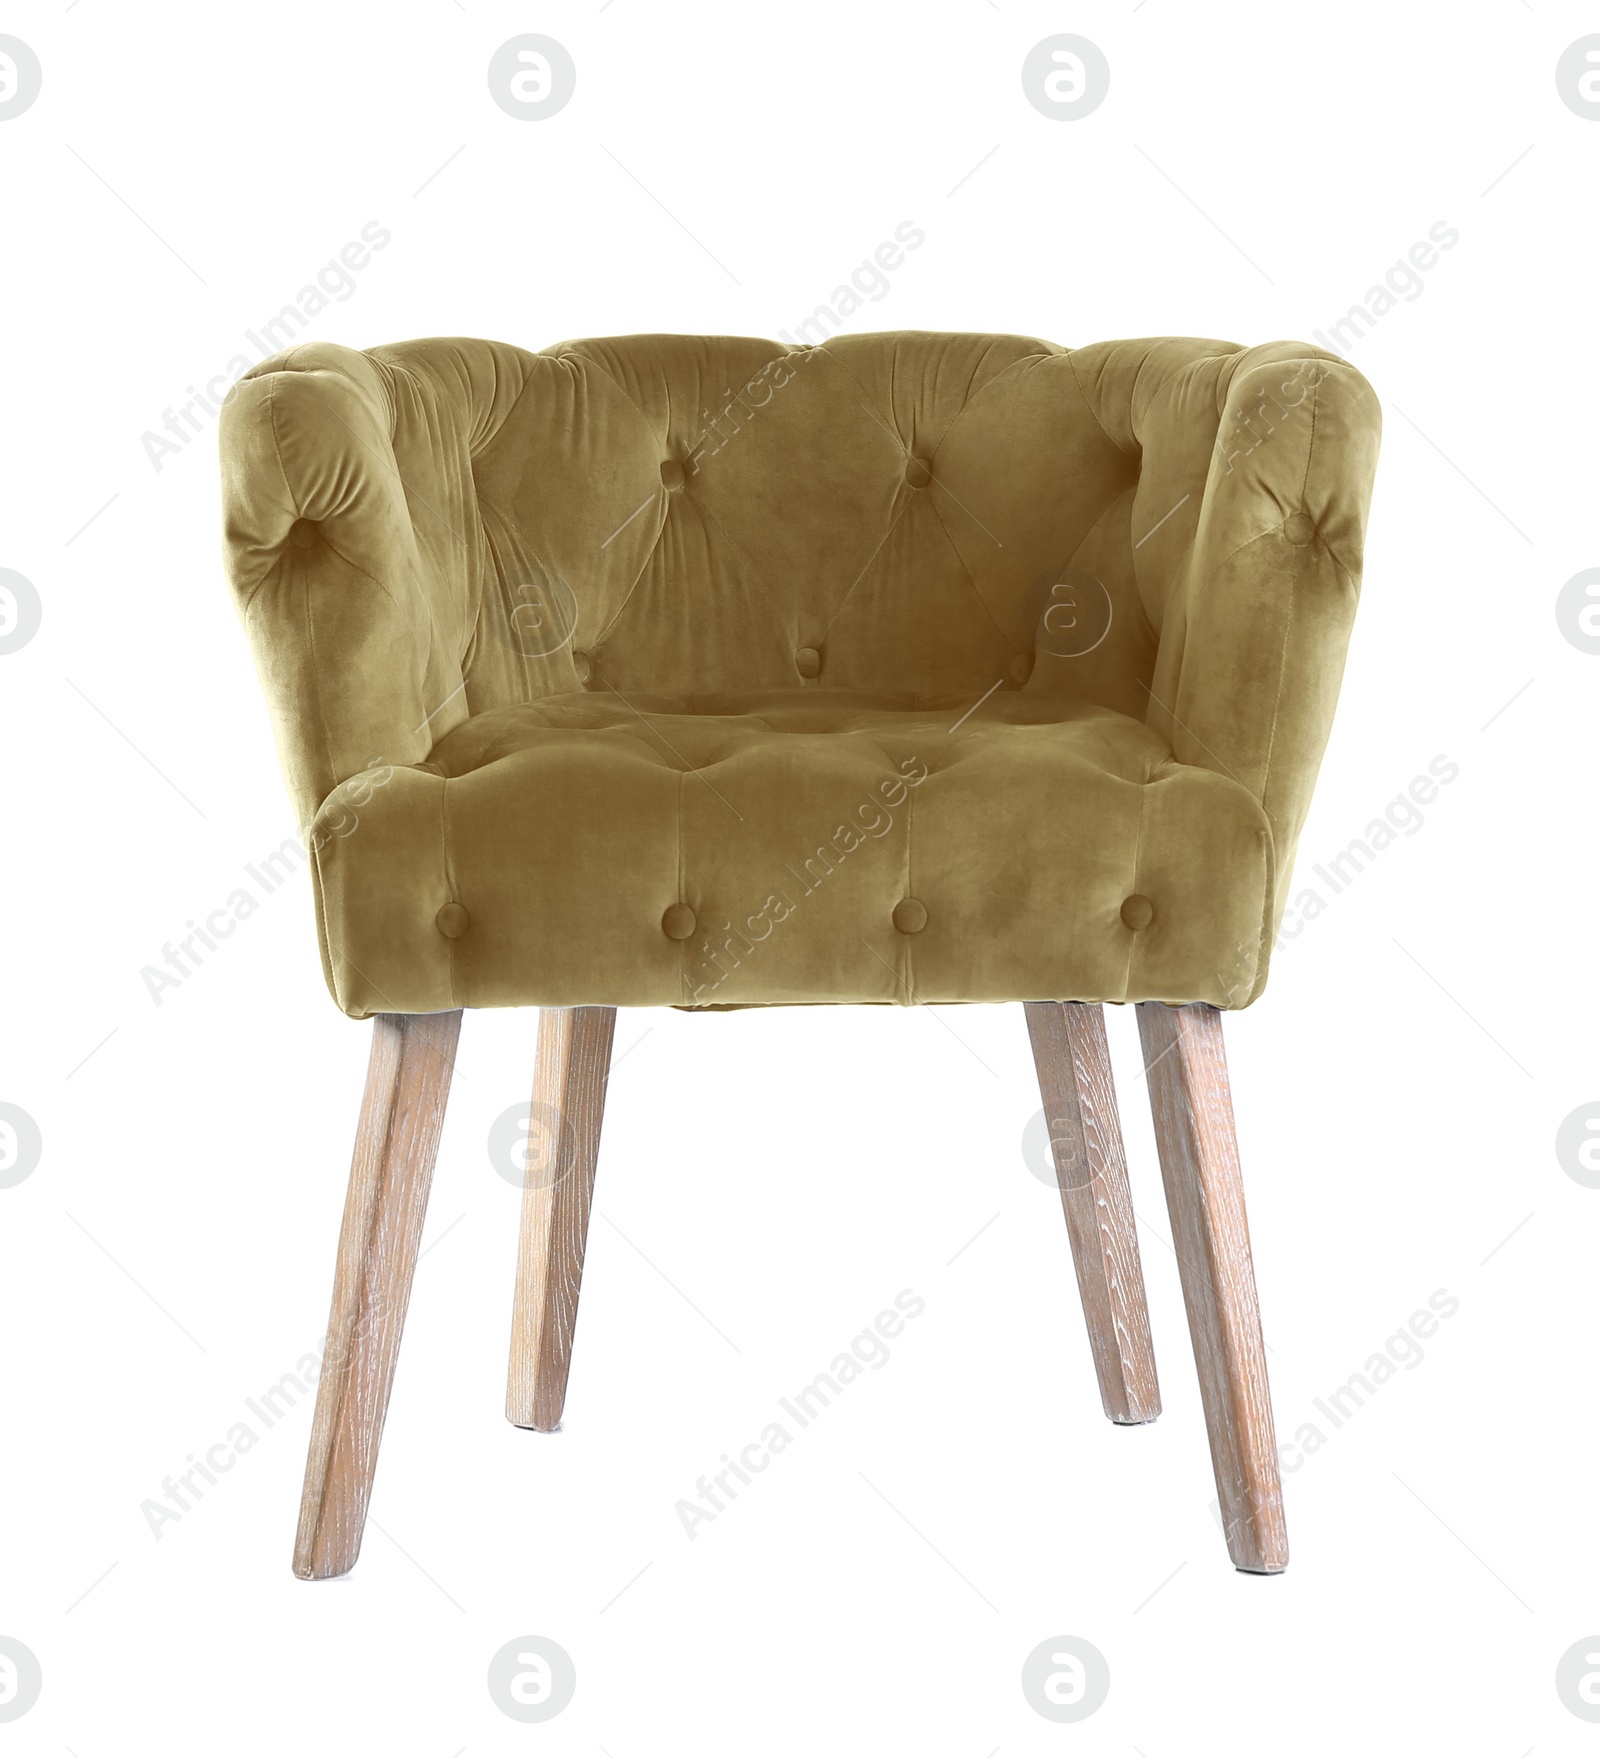 Image of One comfortable dark goldenrod armchair isolated on white